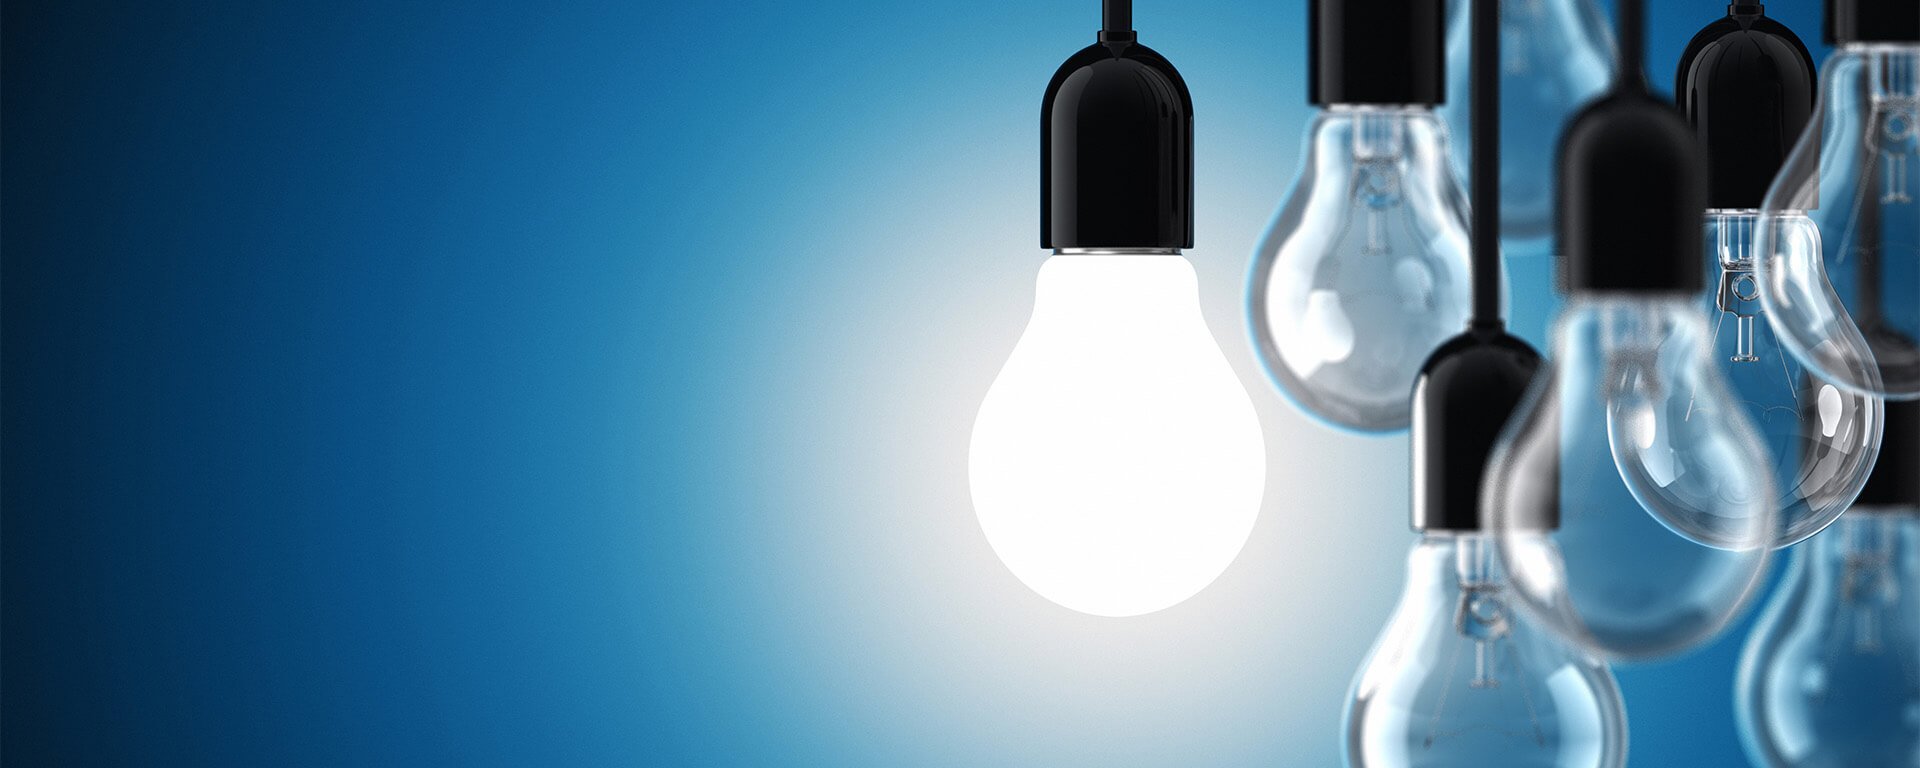 A group of hanging lightbulbs with a single bulb illuminated against a blue background